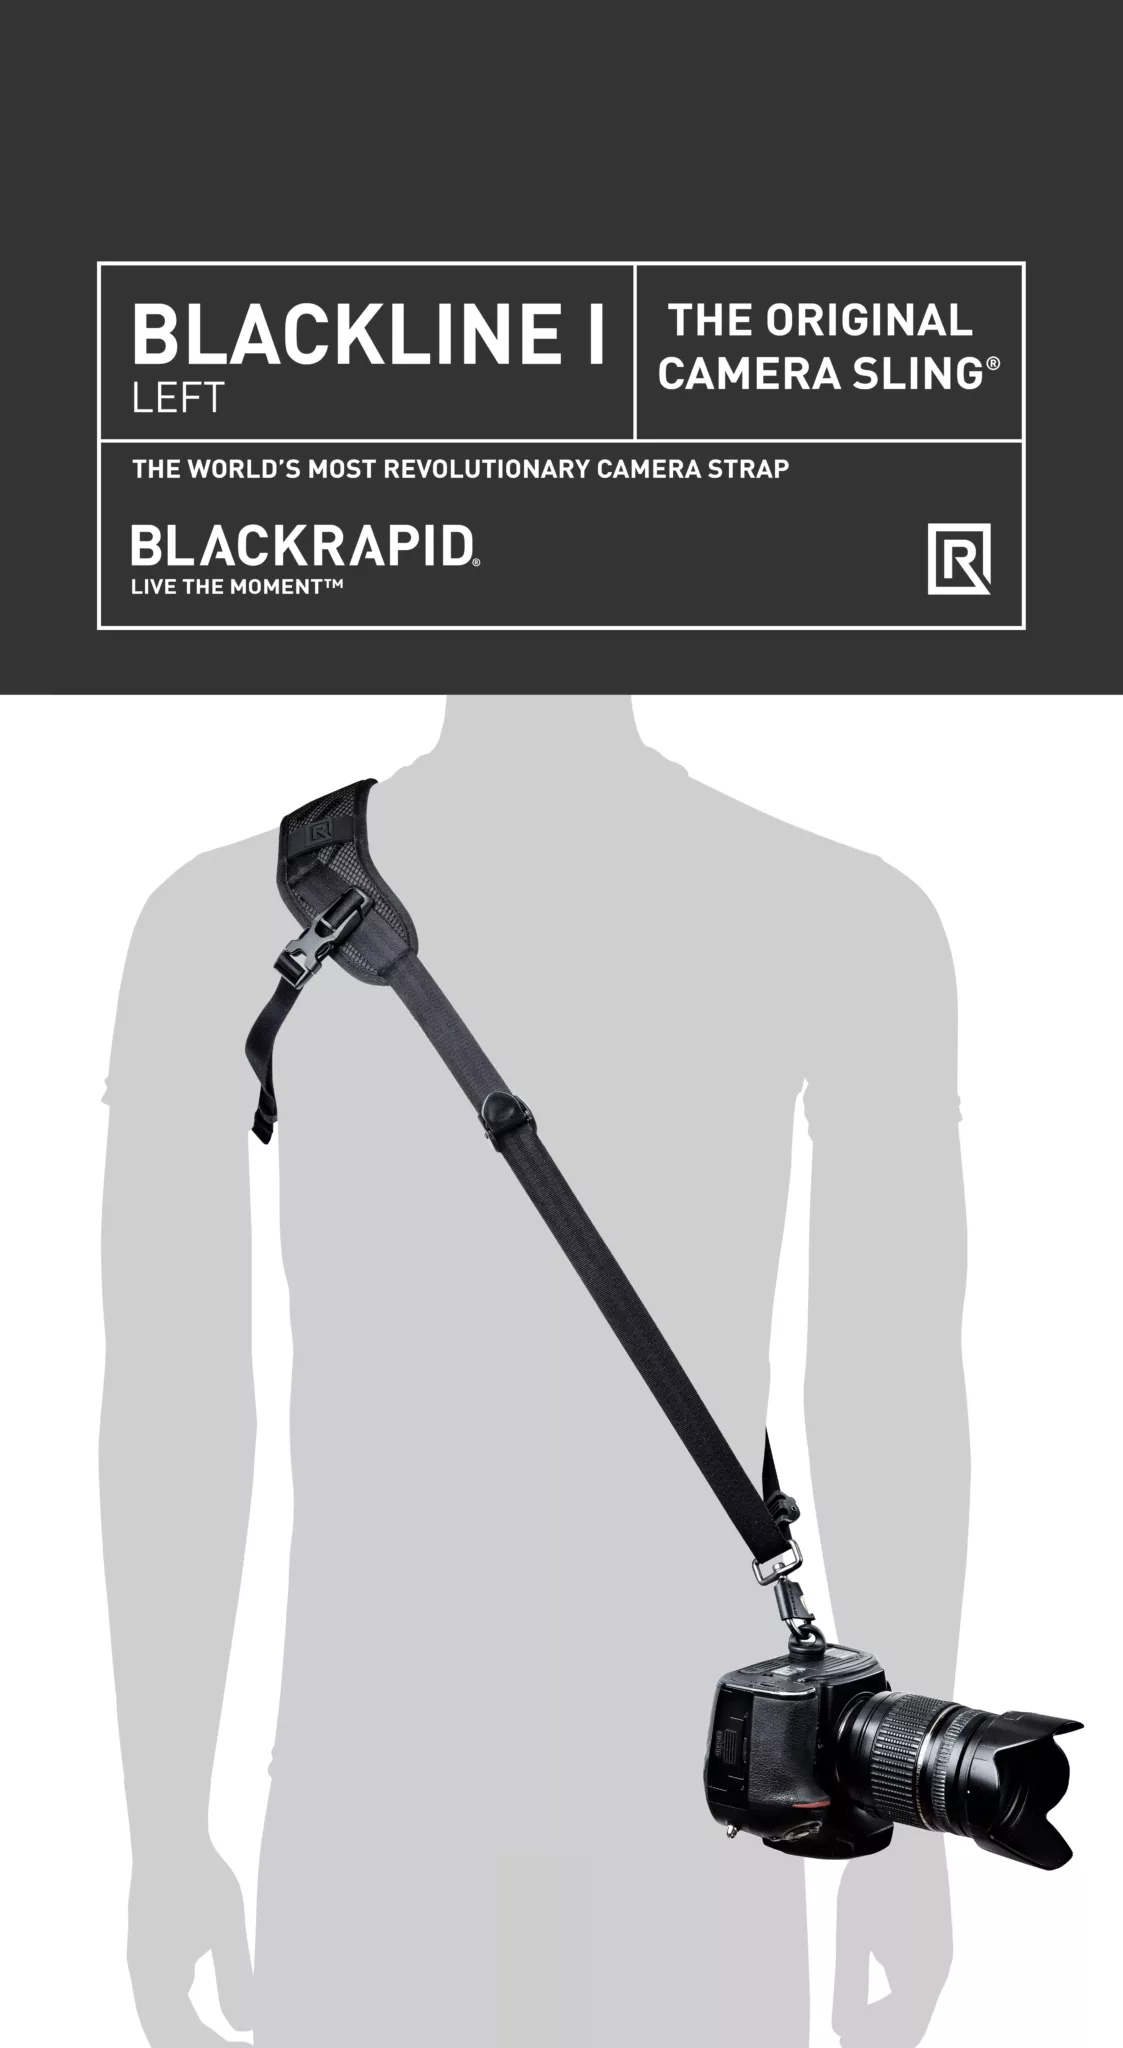 Blackline I Left - The Best Camera Strap Style, With Ultra Breathability! -  BLACKRAPID